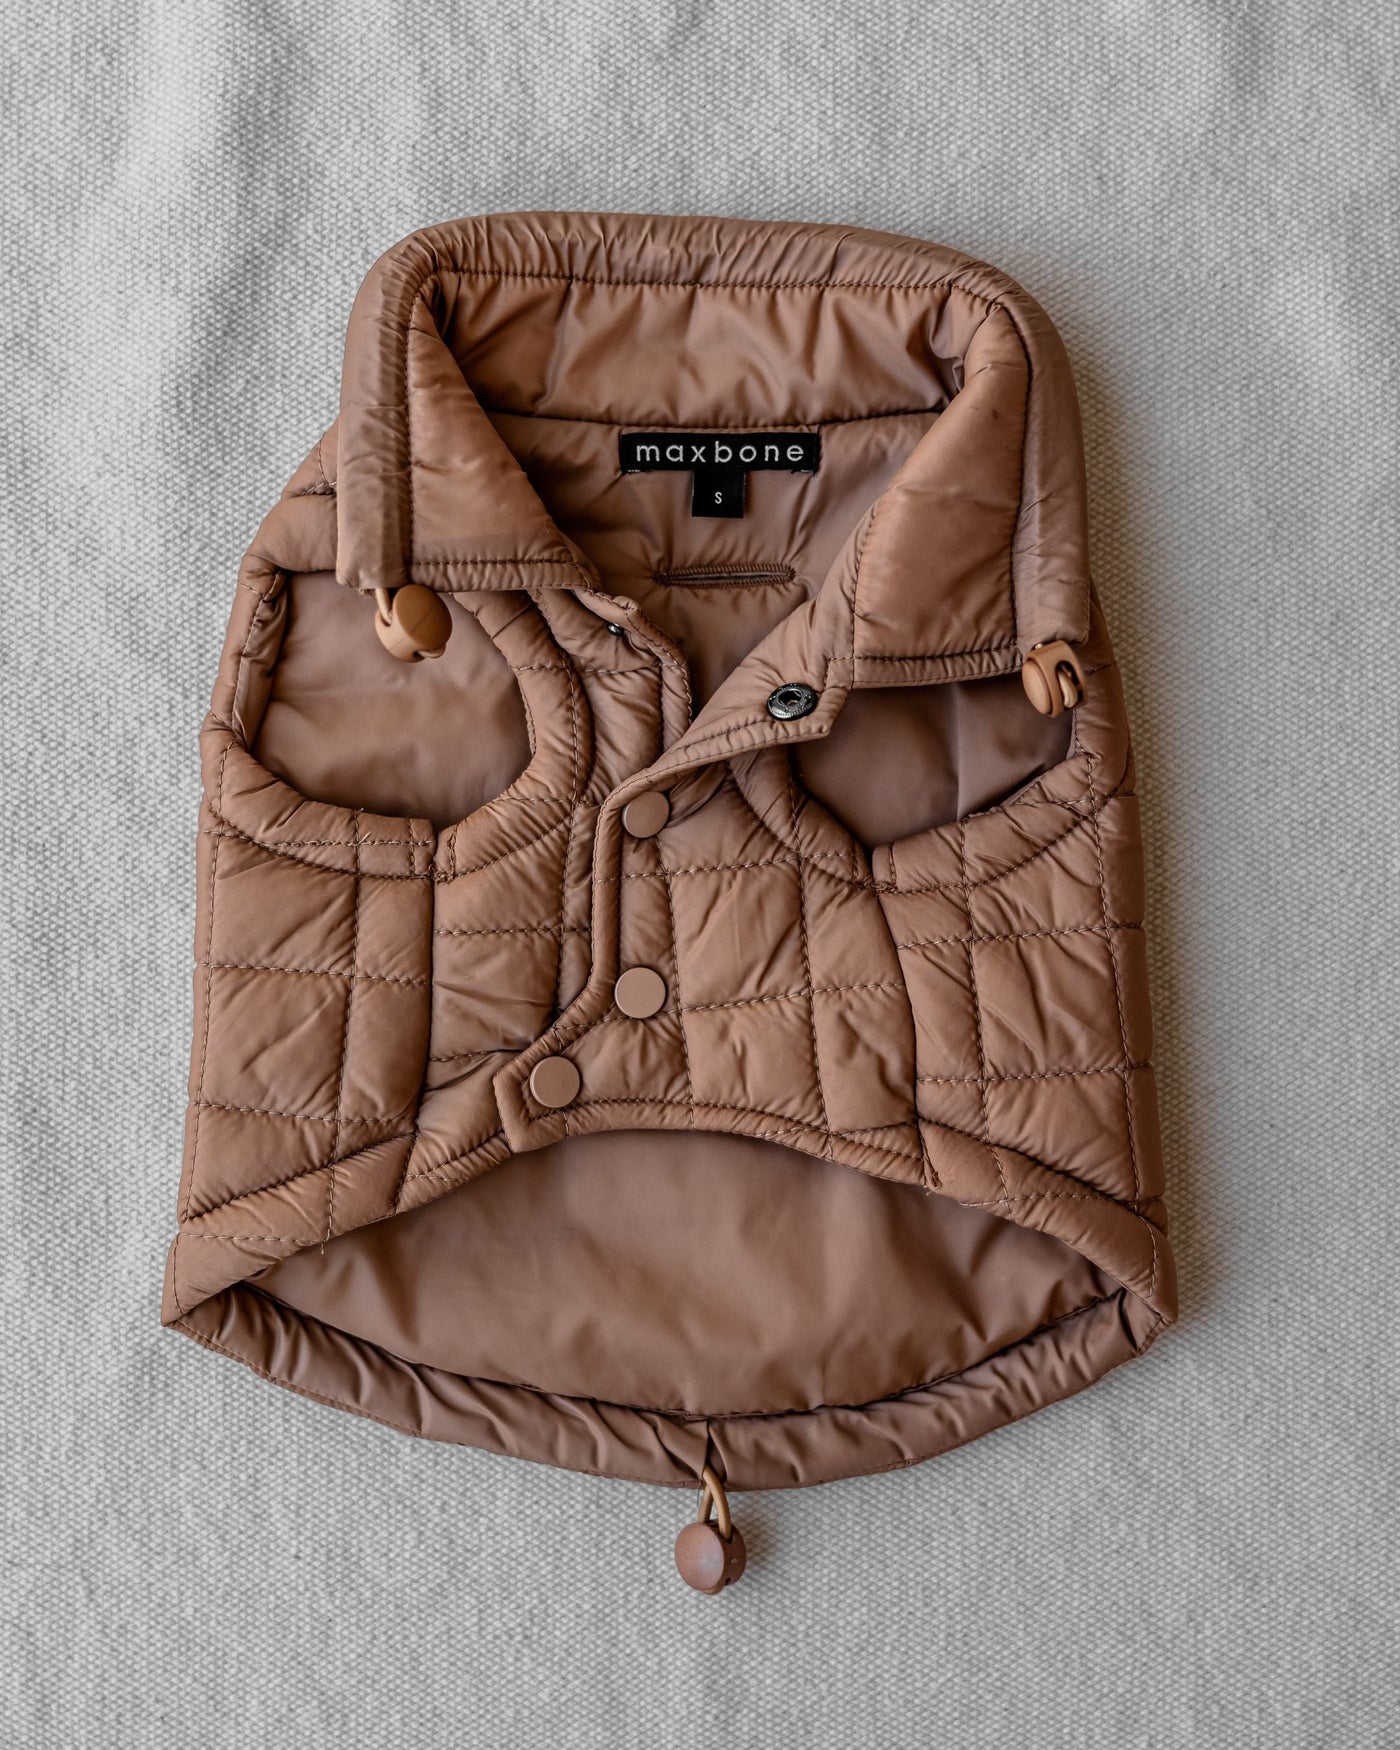 maxbone Easy Fit Jacket in Camel Image